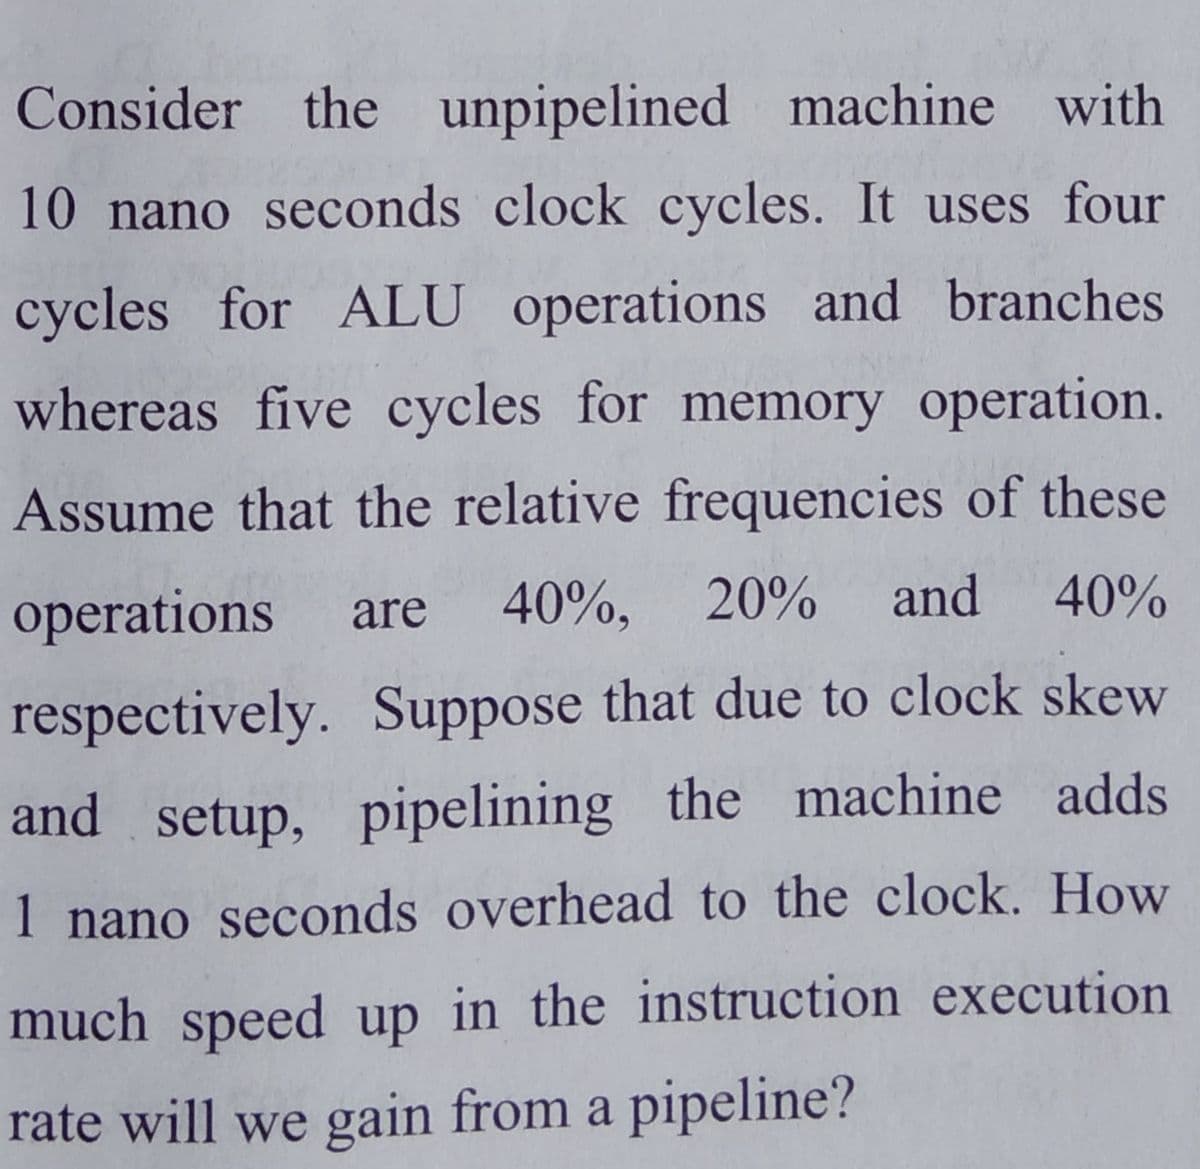 Consider the unpipelined machine with
10 nano seconds clock cycles. It uses four
cycles for ALU operations and branches
whereas five cycles for memory operation.
Assume that the relative frequencies of these
operations
40%, 20%
and 40%
are
respectively. Suppose that due to clock skew
and setup, pipelining the machine adds
1 nano seconds overhead to the clock. How
much speed up in the instruction execution
rate will we gain from a pipeline?
